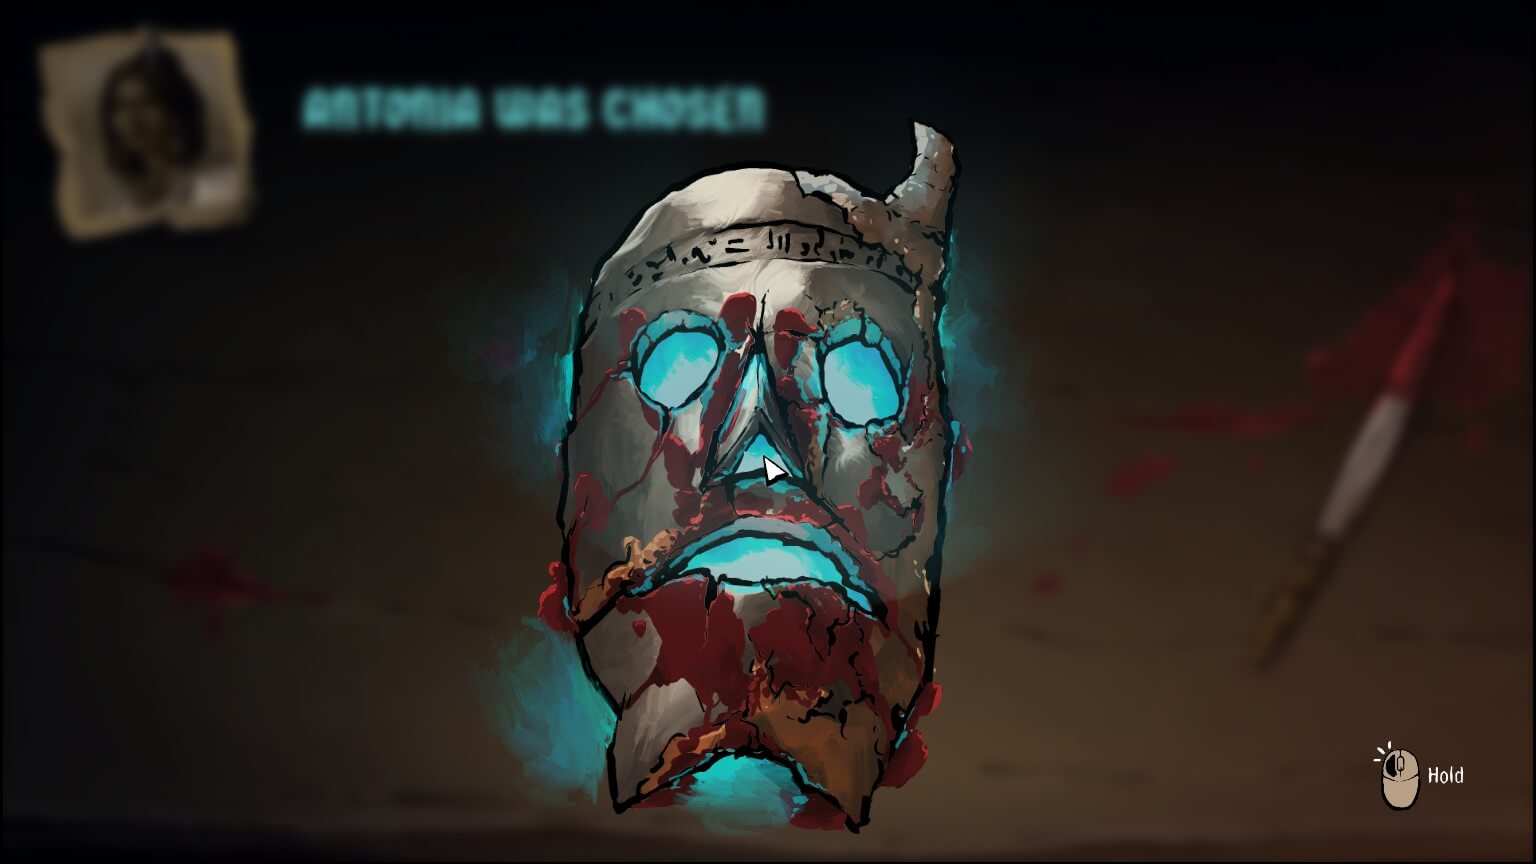 The mask the player wears during the game. It has runes engraved across the forehead as well as a horn protruding out of the upper left side. A hand print which looks to be made with blood is also visible. The mask itself gives off a ghostly blue glow.